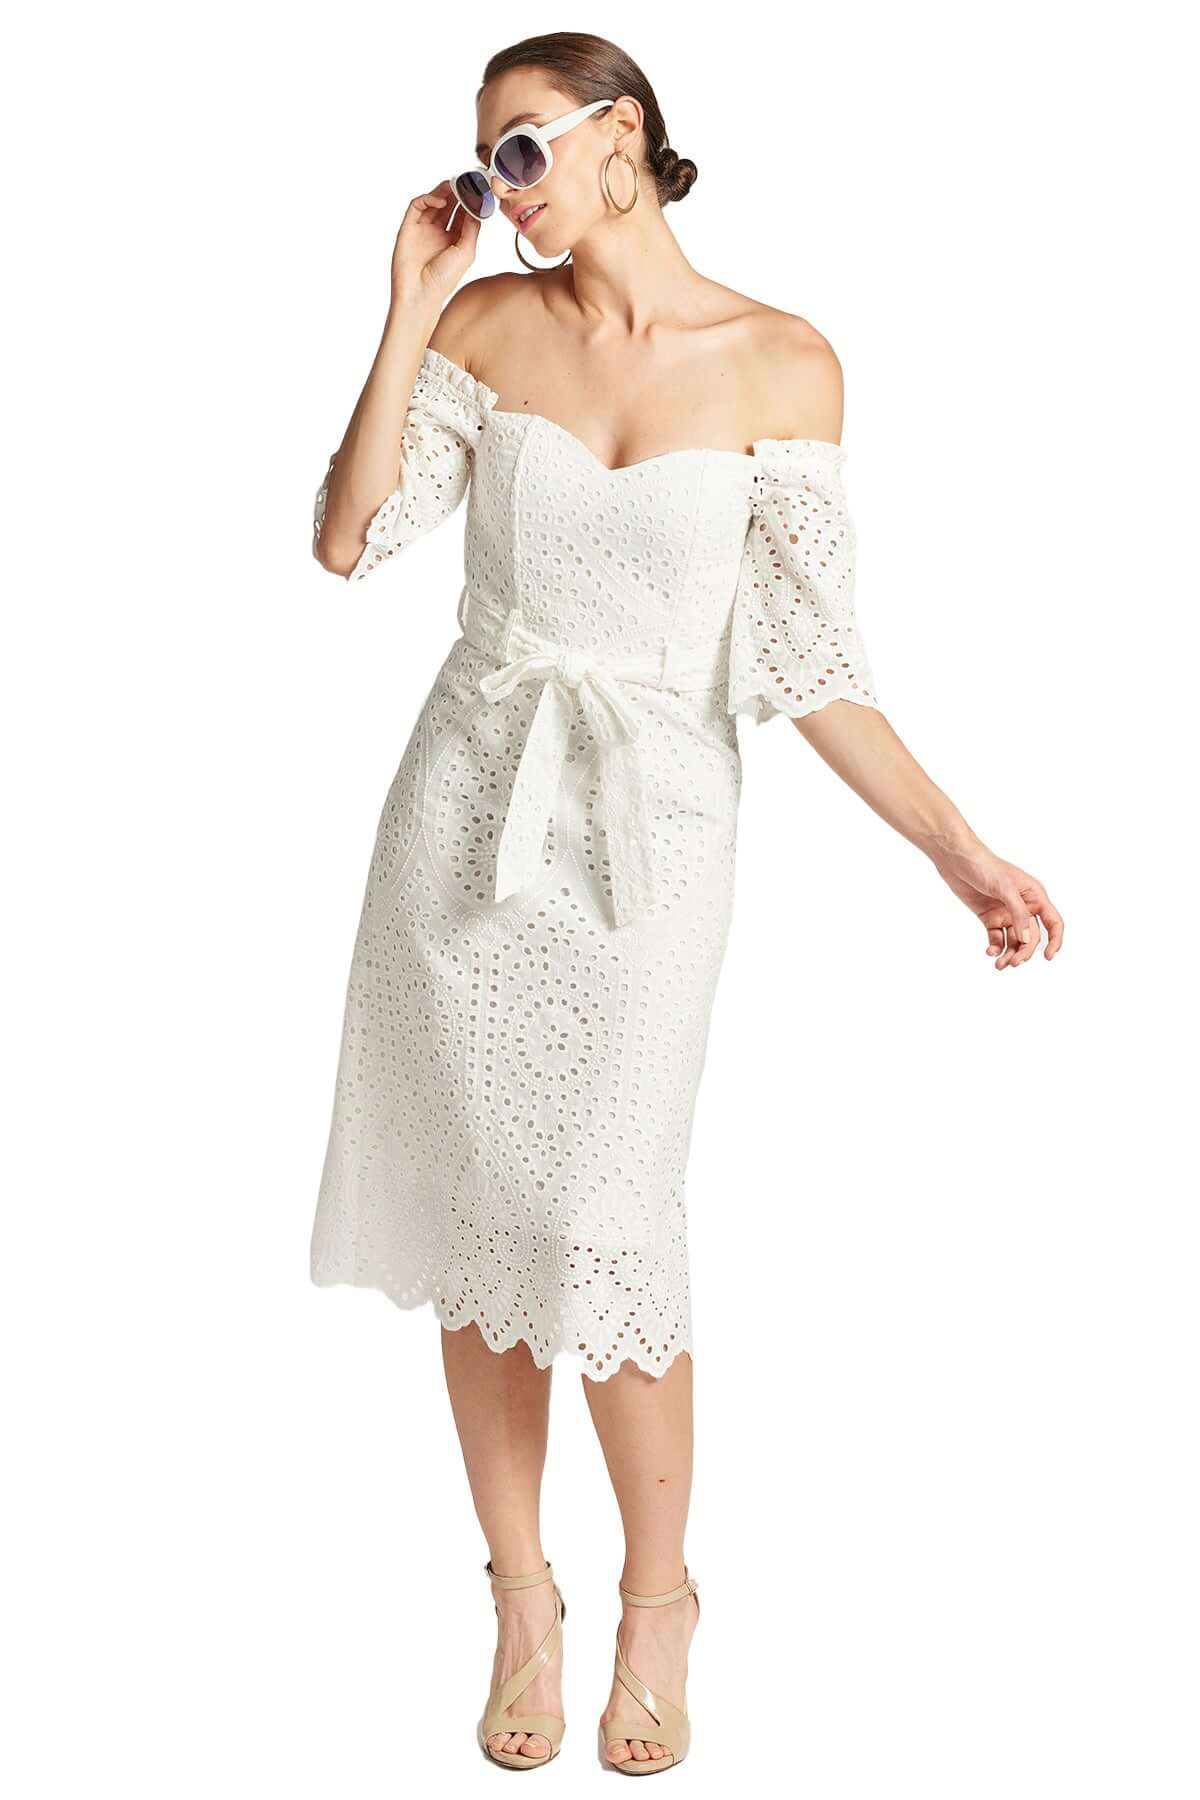 Front view of model wearing the Simona Maghen Jasmine Dress, white cotton scalloped eyelet midi a-line dress with off the shoulder sweetheart neckline, self belt, and short sleeves. Accessorized with a pair of big gold hoop earrings and white sunglasses.